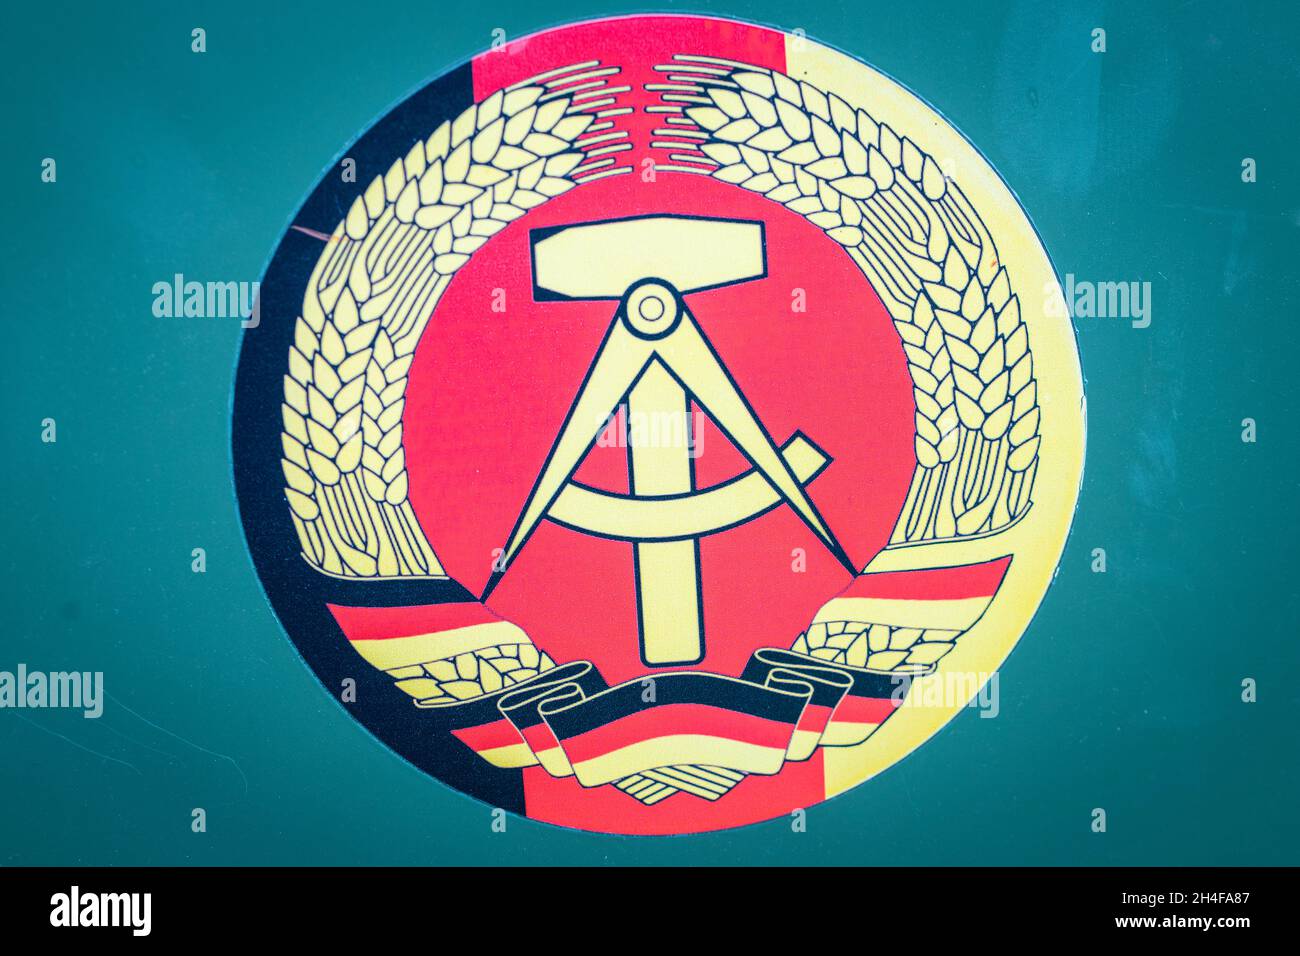 old emblem of the German Democratic Republic, the communist symbol of eastern Germany Stock Photo